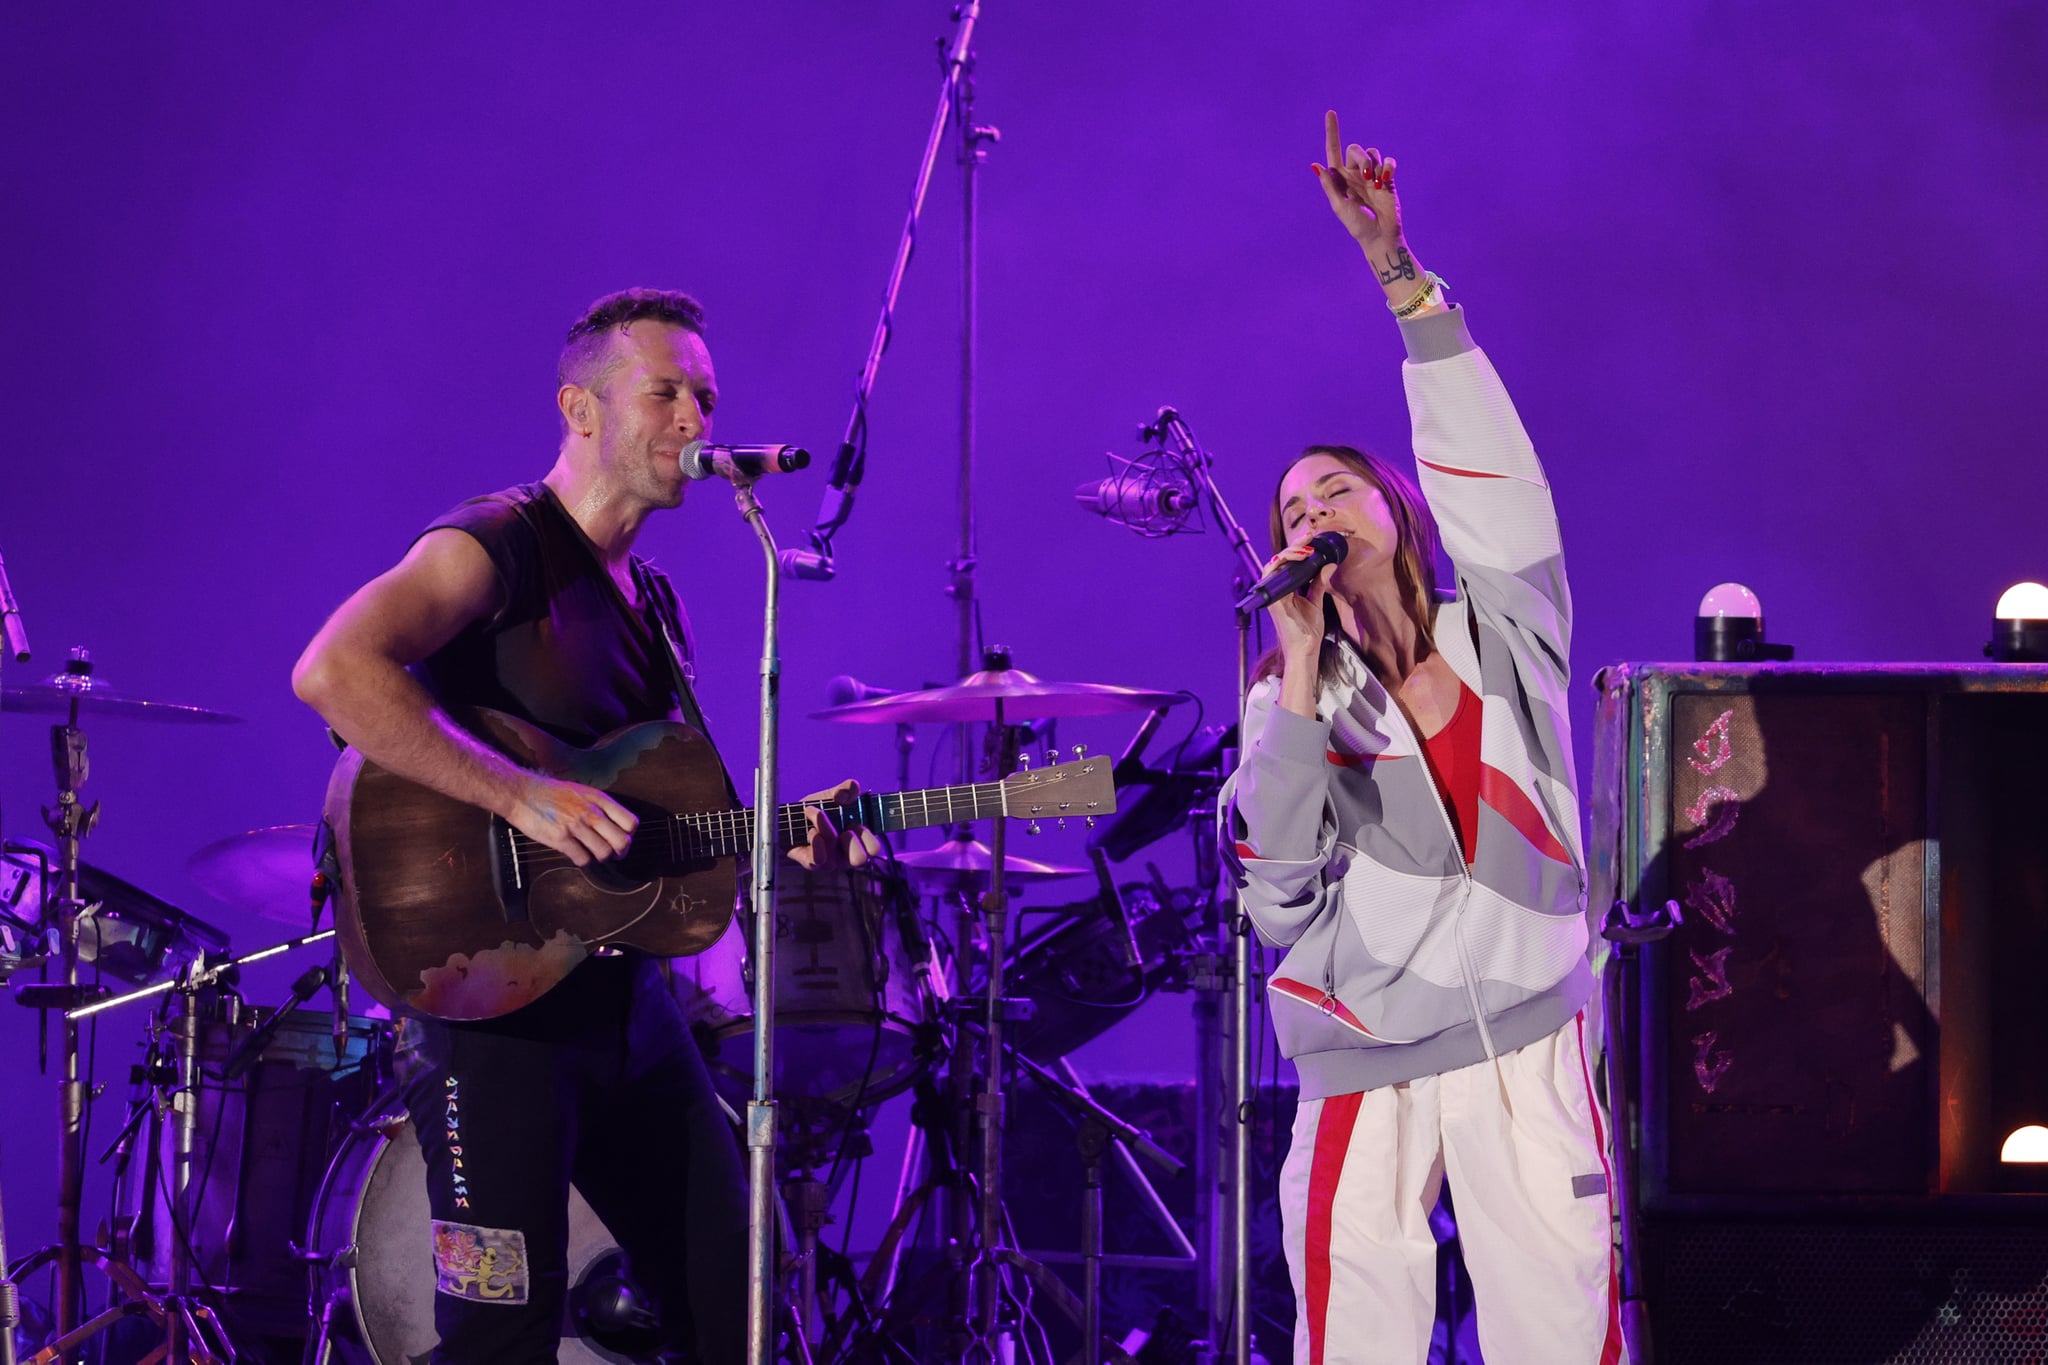 LOS ANGELES, CALIFORNIA - OCTOBER 23: Chris Martin of Coldplay and Melanie C perform onstage during the 8th annual 